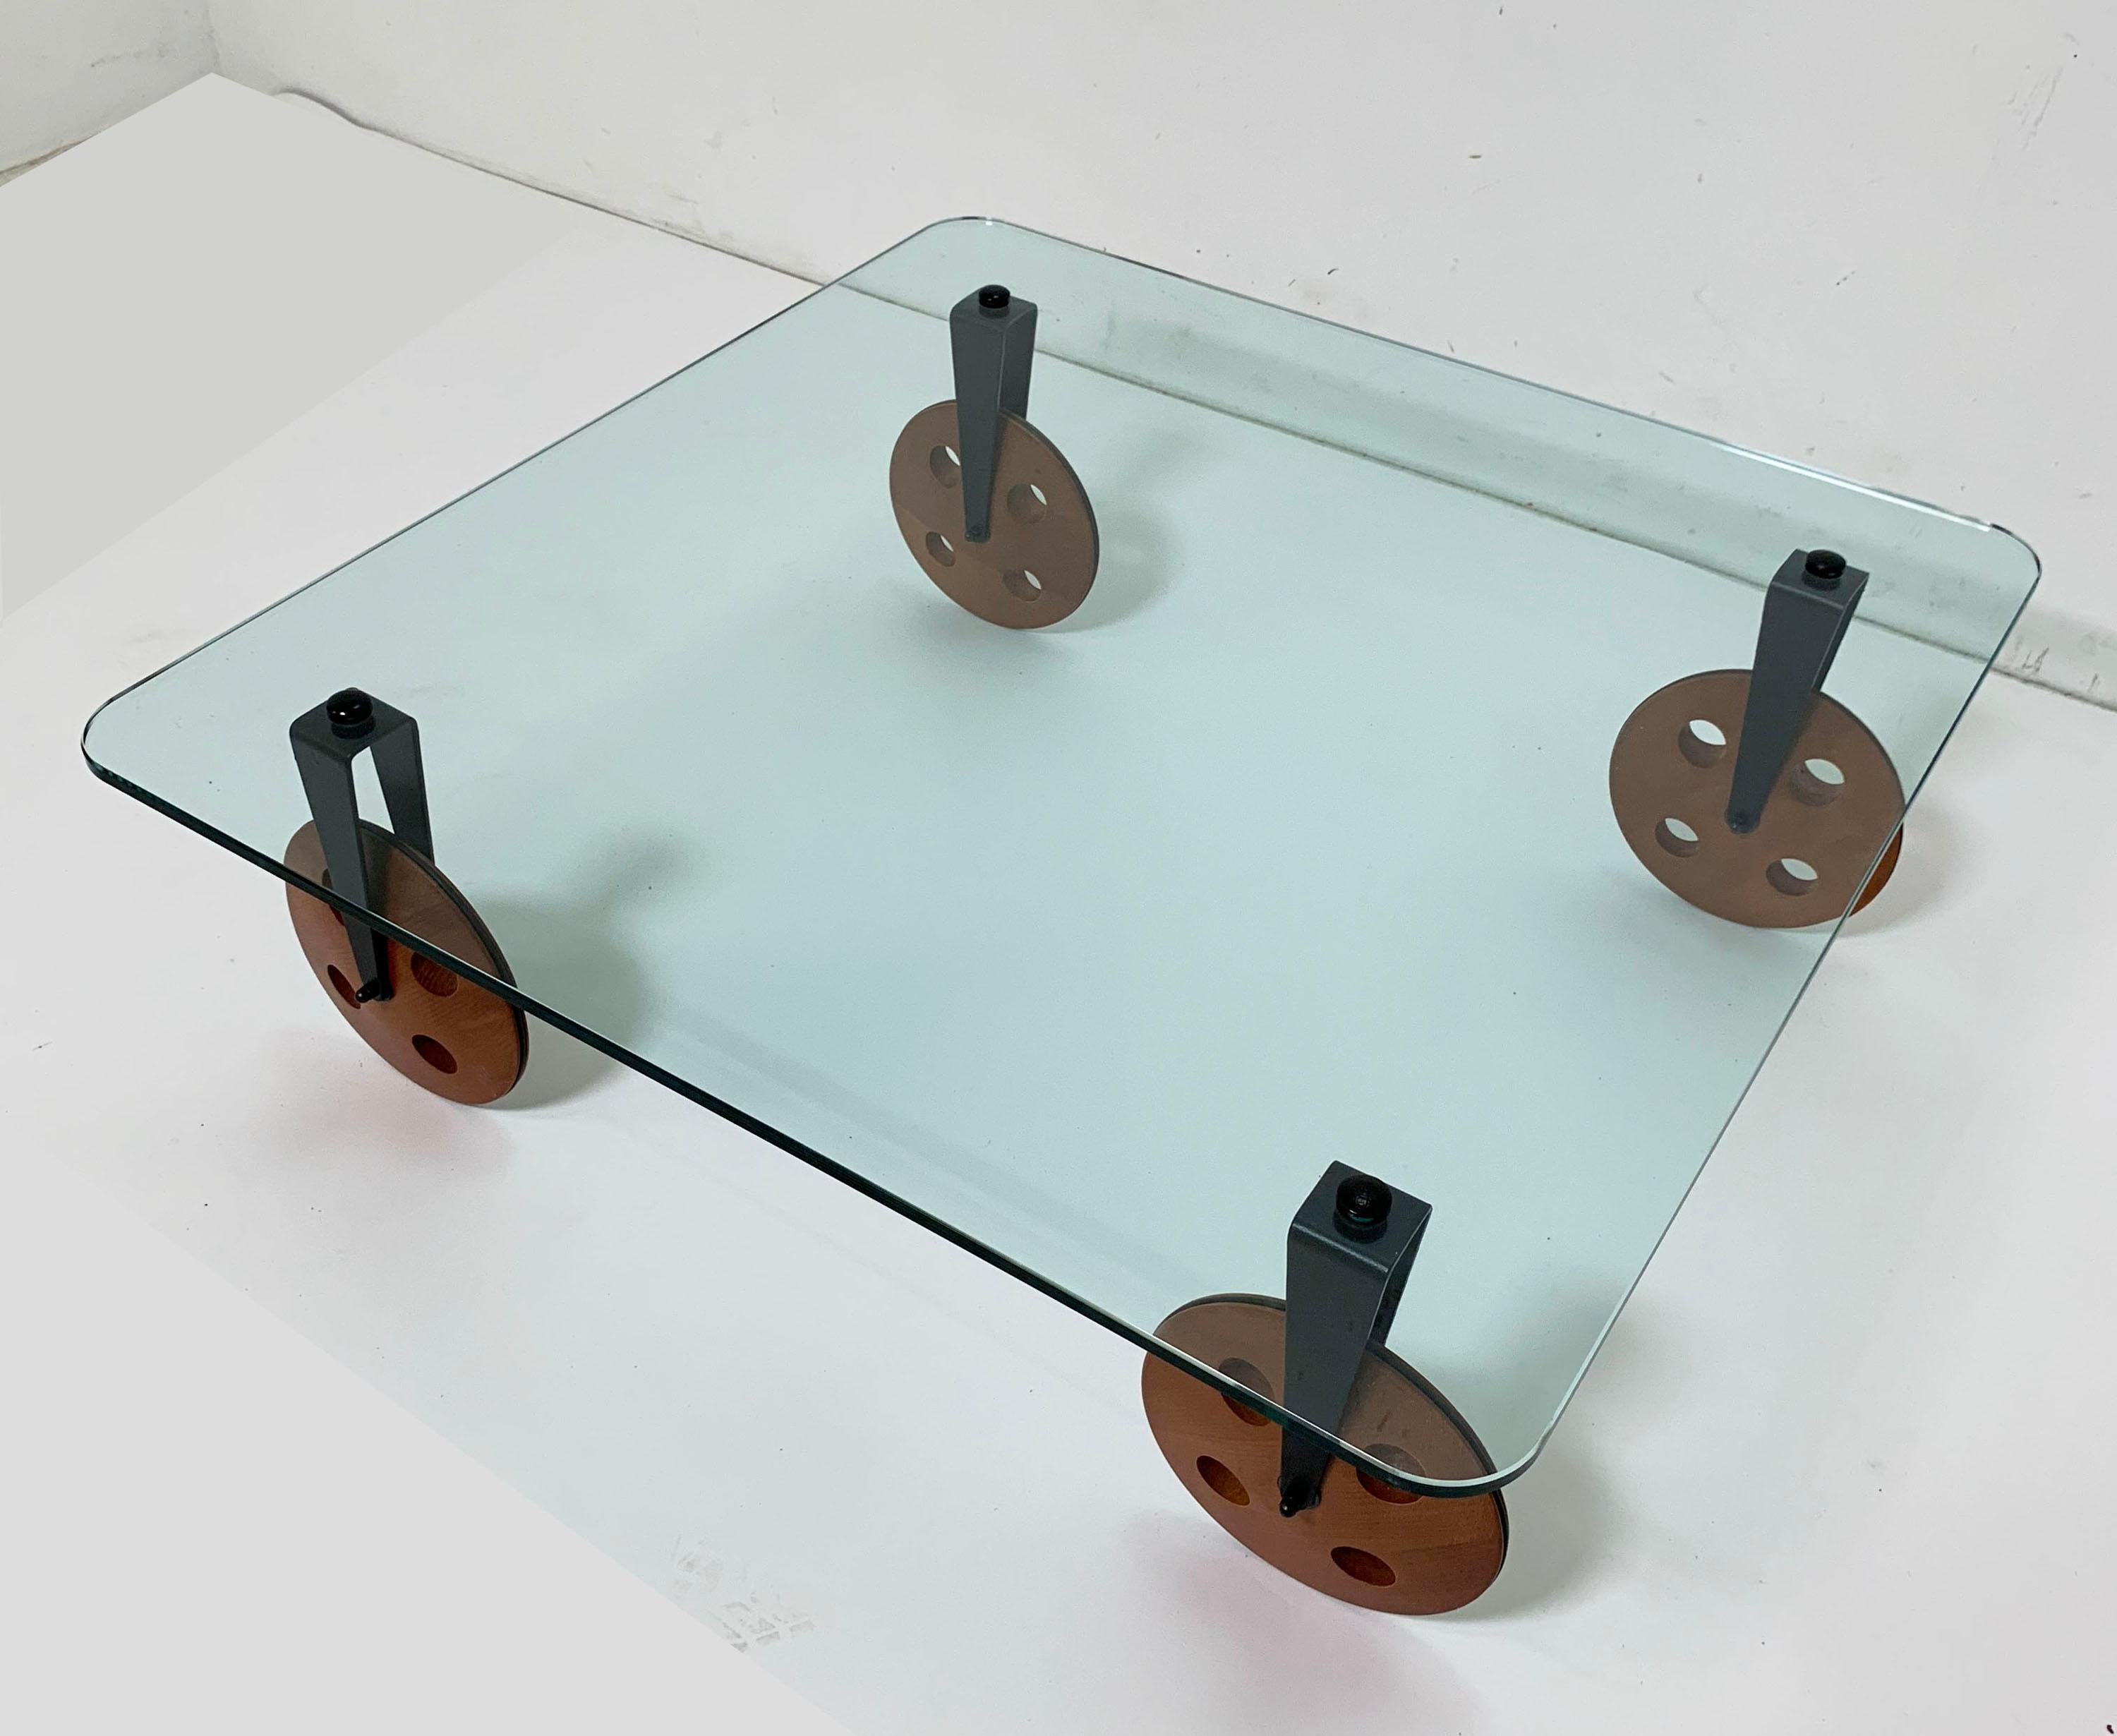 When the Italian architect Gae Aulenti introduced her iconic glass topped “Tavolo Con Ruote” coffee table in 1980, it created a design sensation that helped define the Postmodern age. The rubber wheeled version she devised for Fontana Arte spawned a